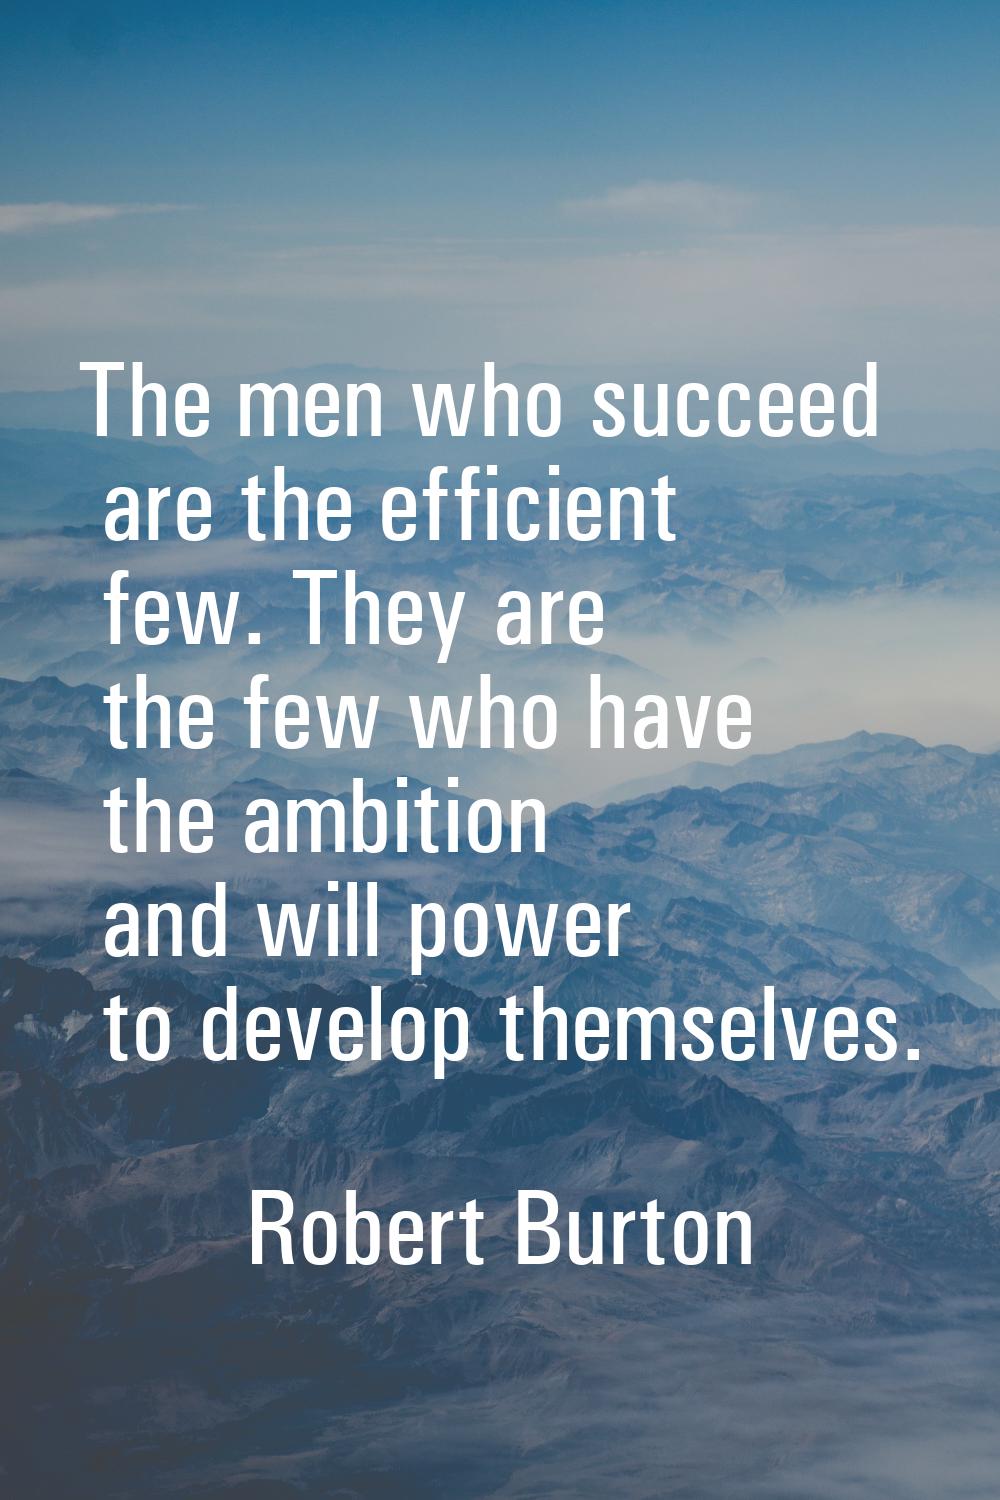 The men who succeed are the efficient few. They are the few who have the ambition and will power to